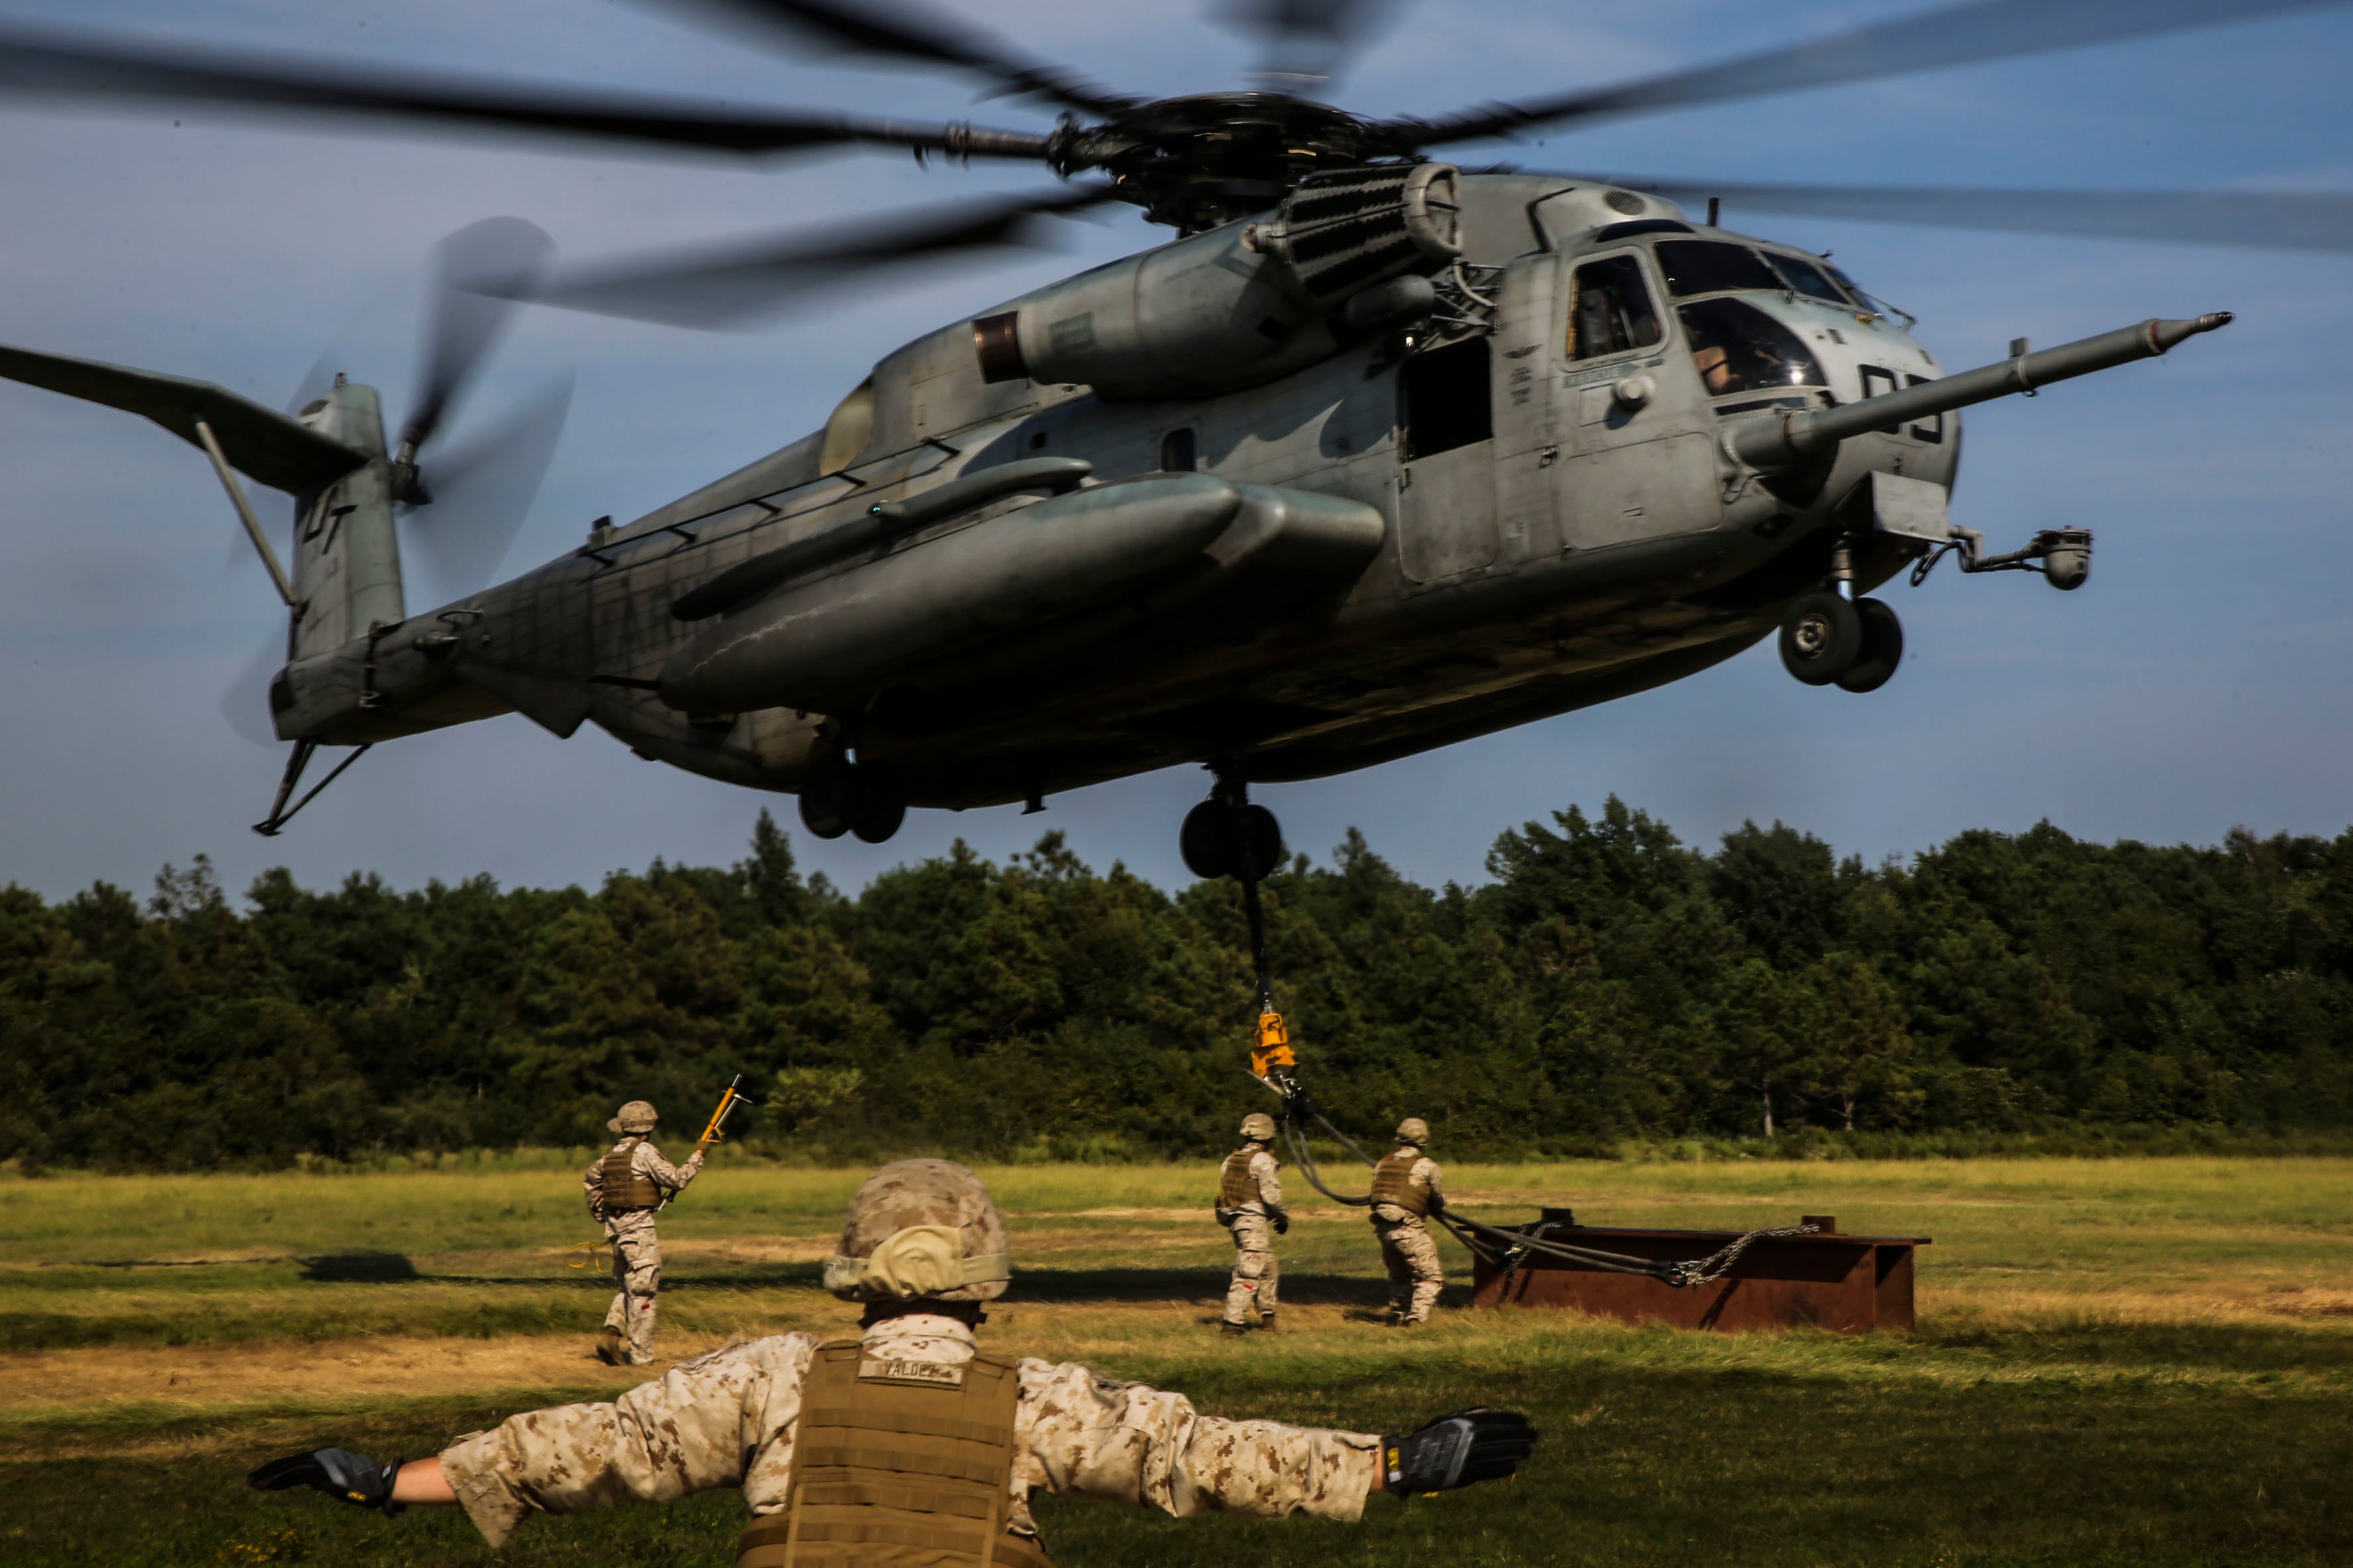 A Marine guides a CH-53 Super Stallion during a helicopter support team exercise at Landing Zone Albatross aboard Camp Lejeune, N.C., Sept. 2, 2015. US Marine Corps photo.